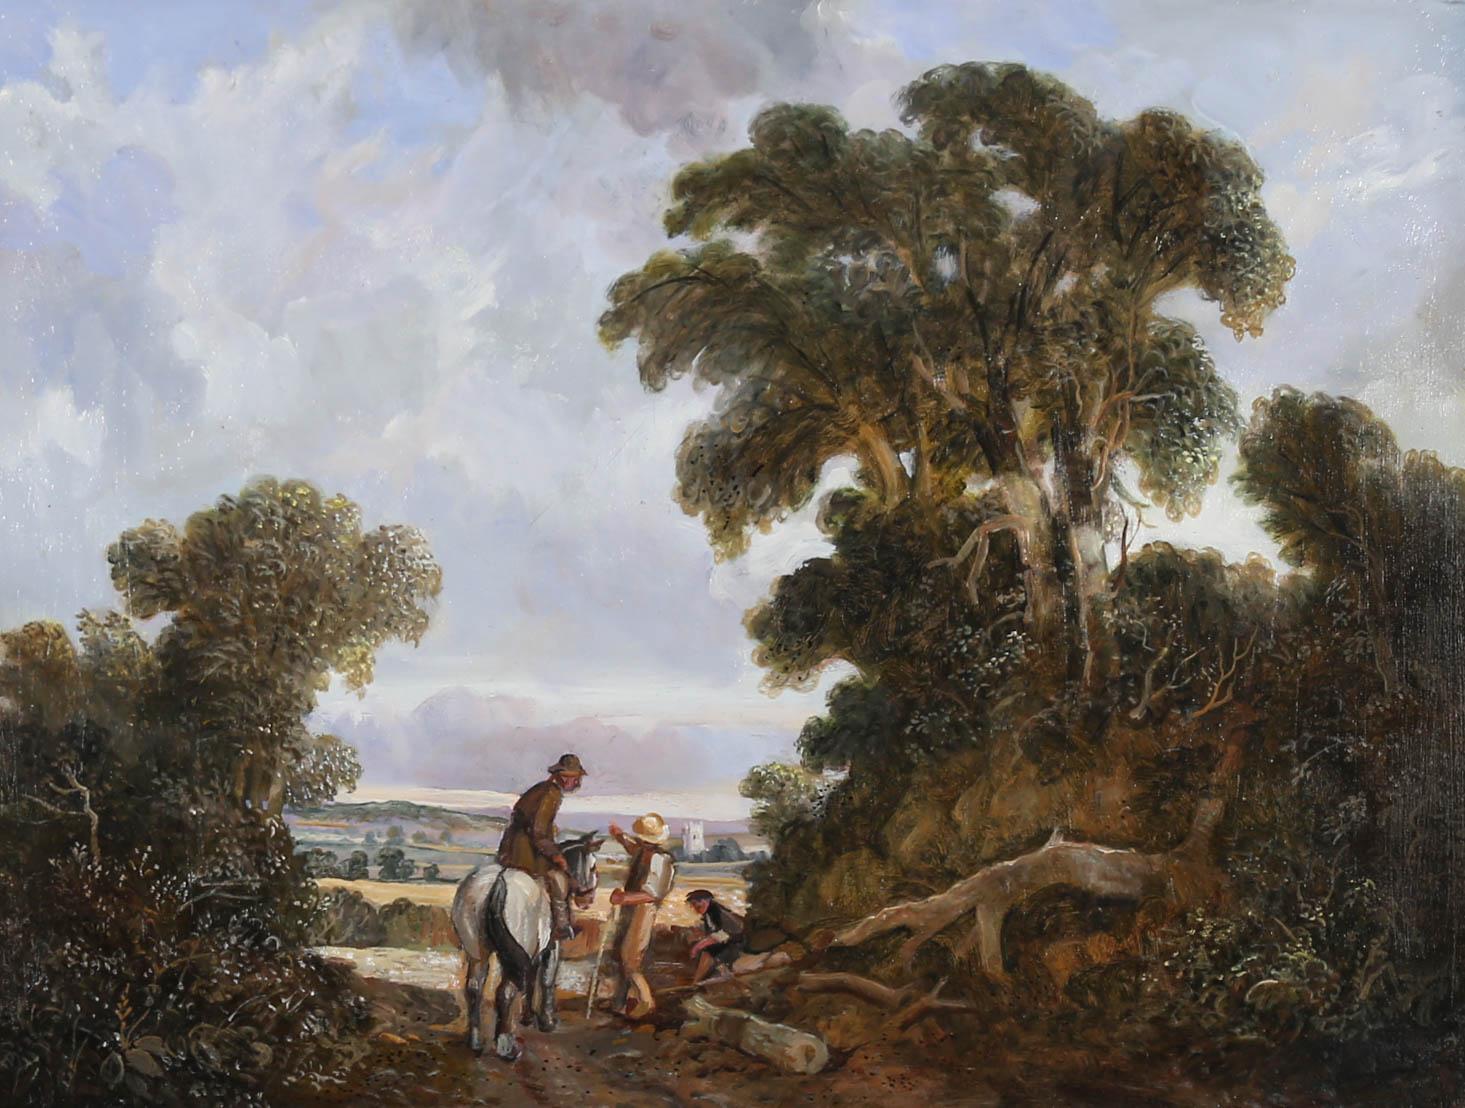 A classical landscape study depicting three figures on a country path. A gentleman on horseback asks two labourers for directions and a small church can be seen in the distance. Painted in a 19th century style with great attention given to the